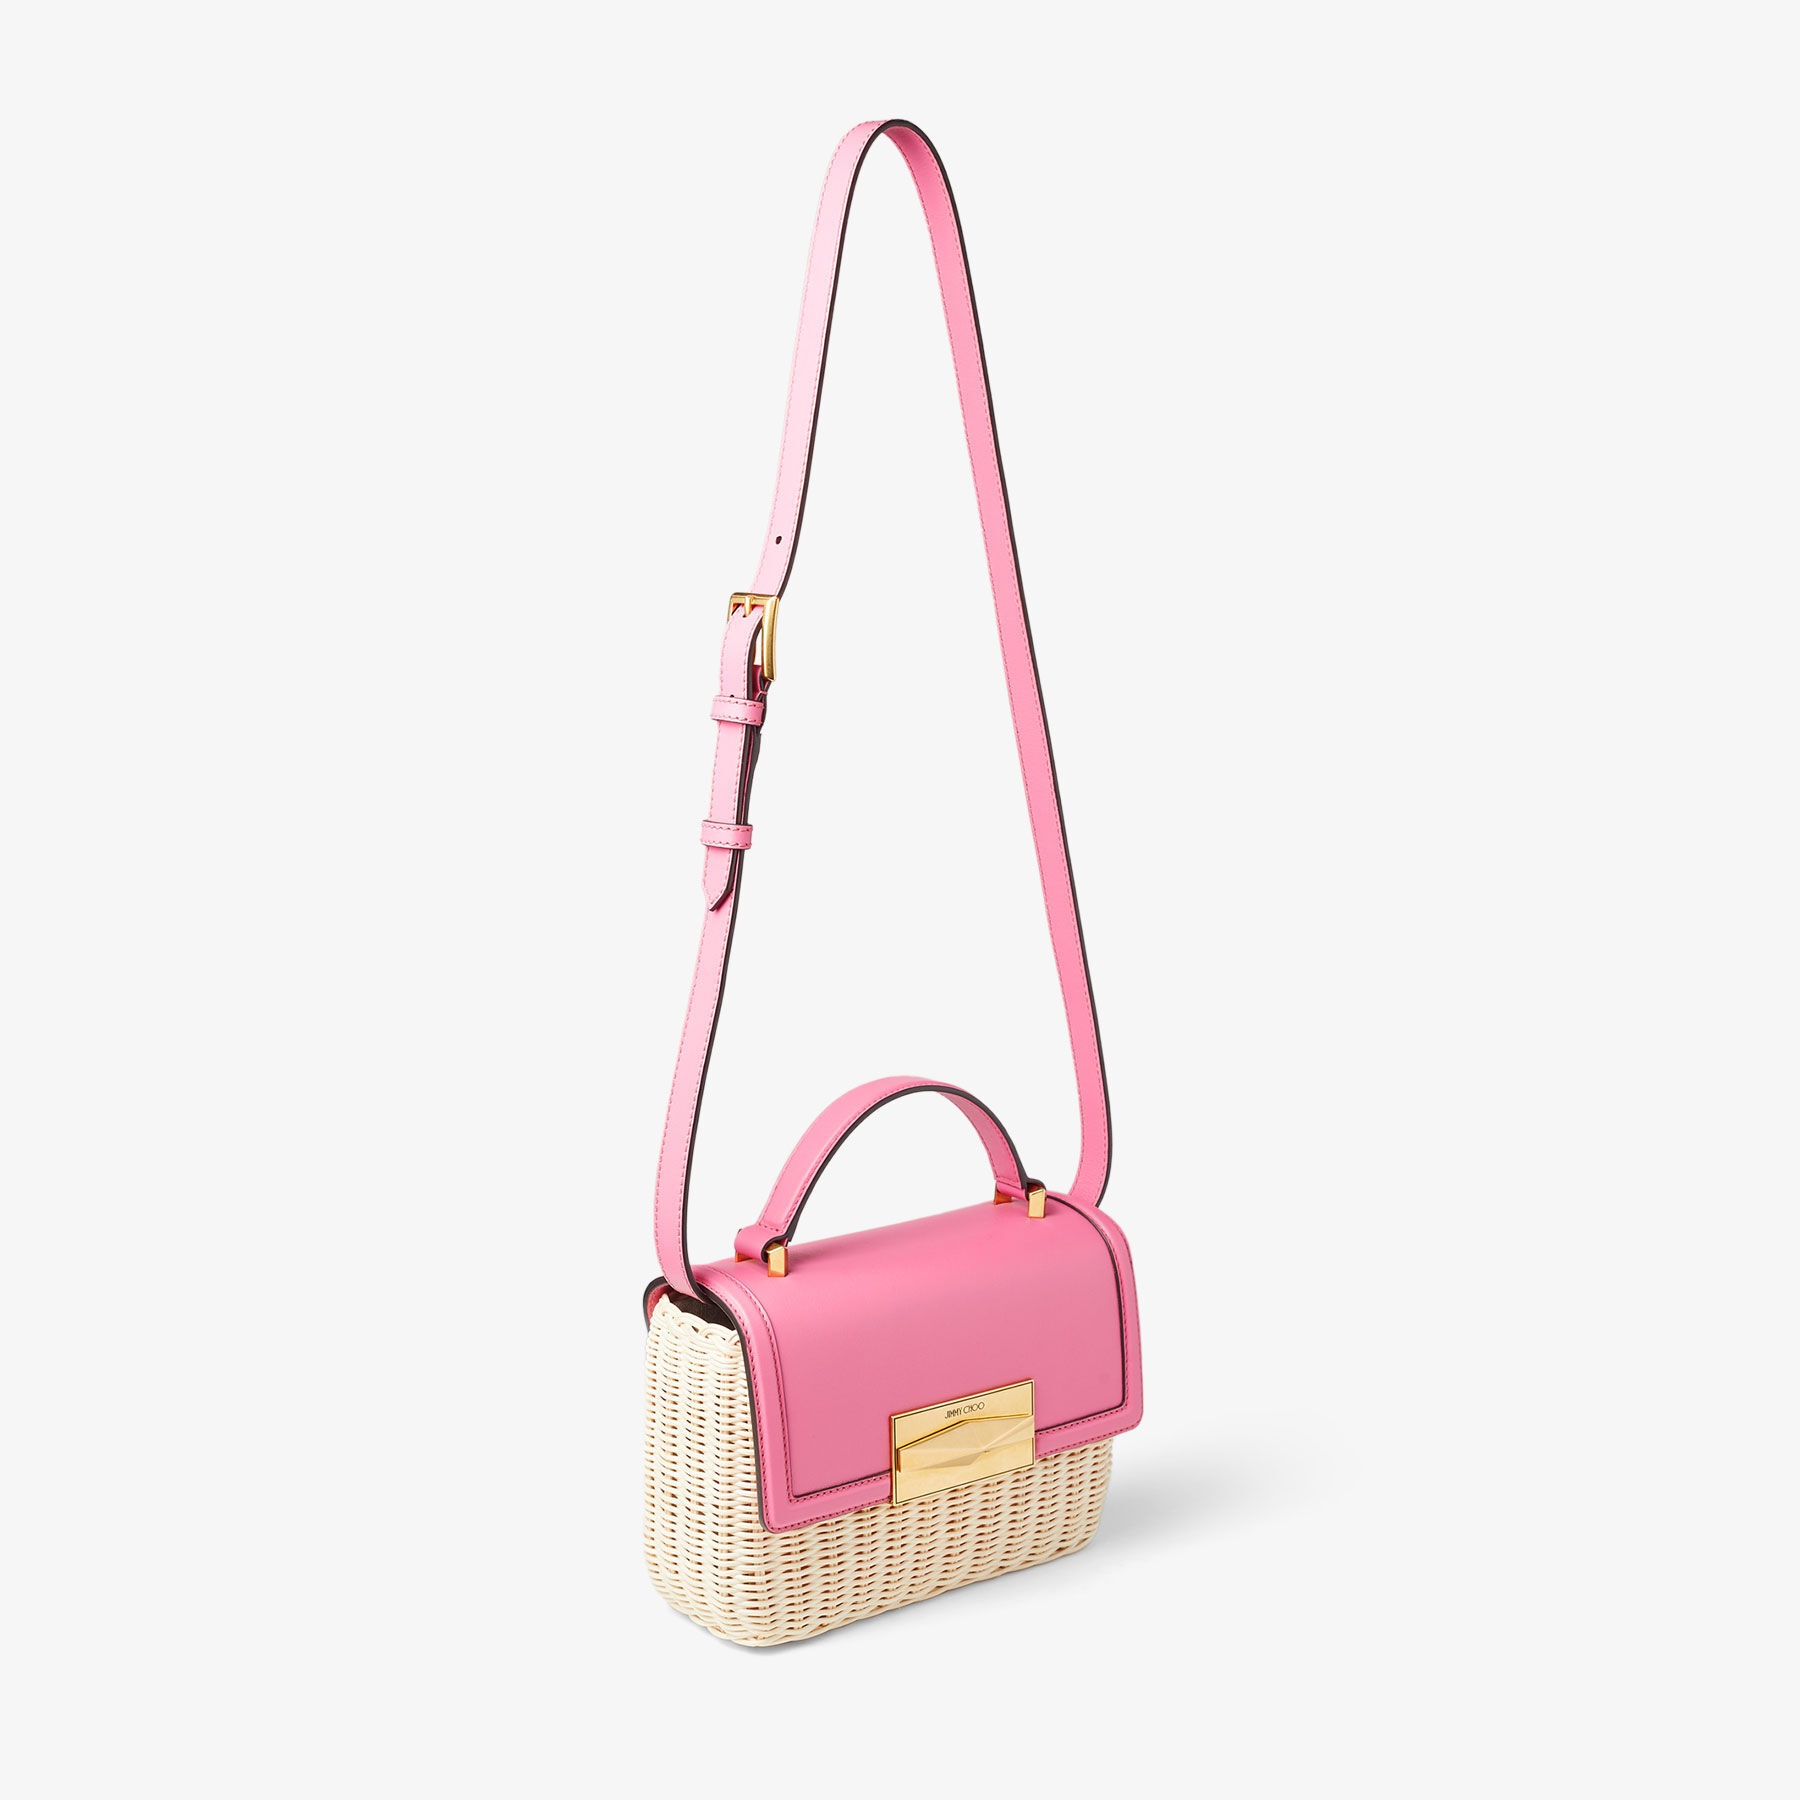 Diamond Top Handle
Natural/Candy Pink Wicker and Leather Top Handle Bag - 6